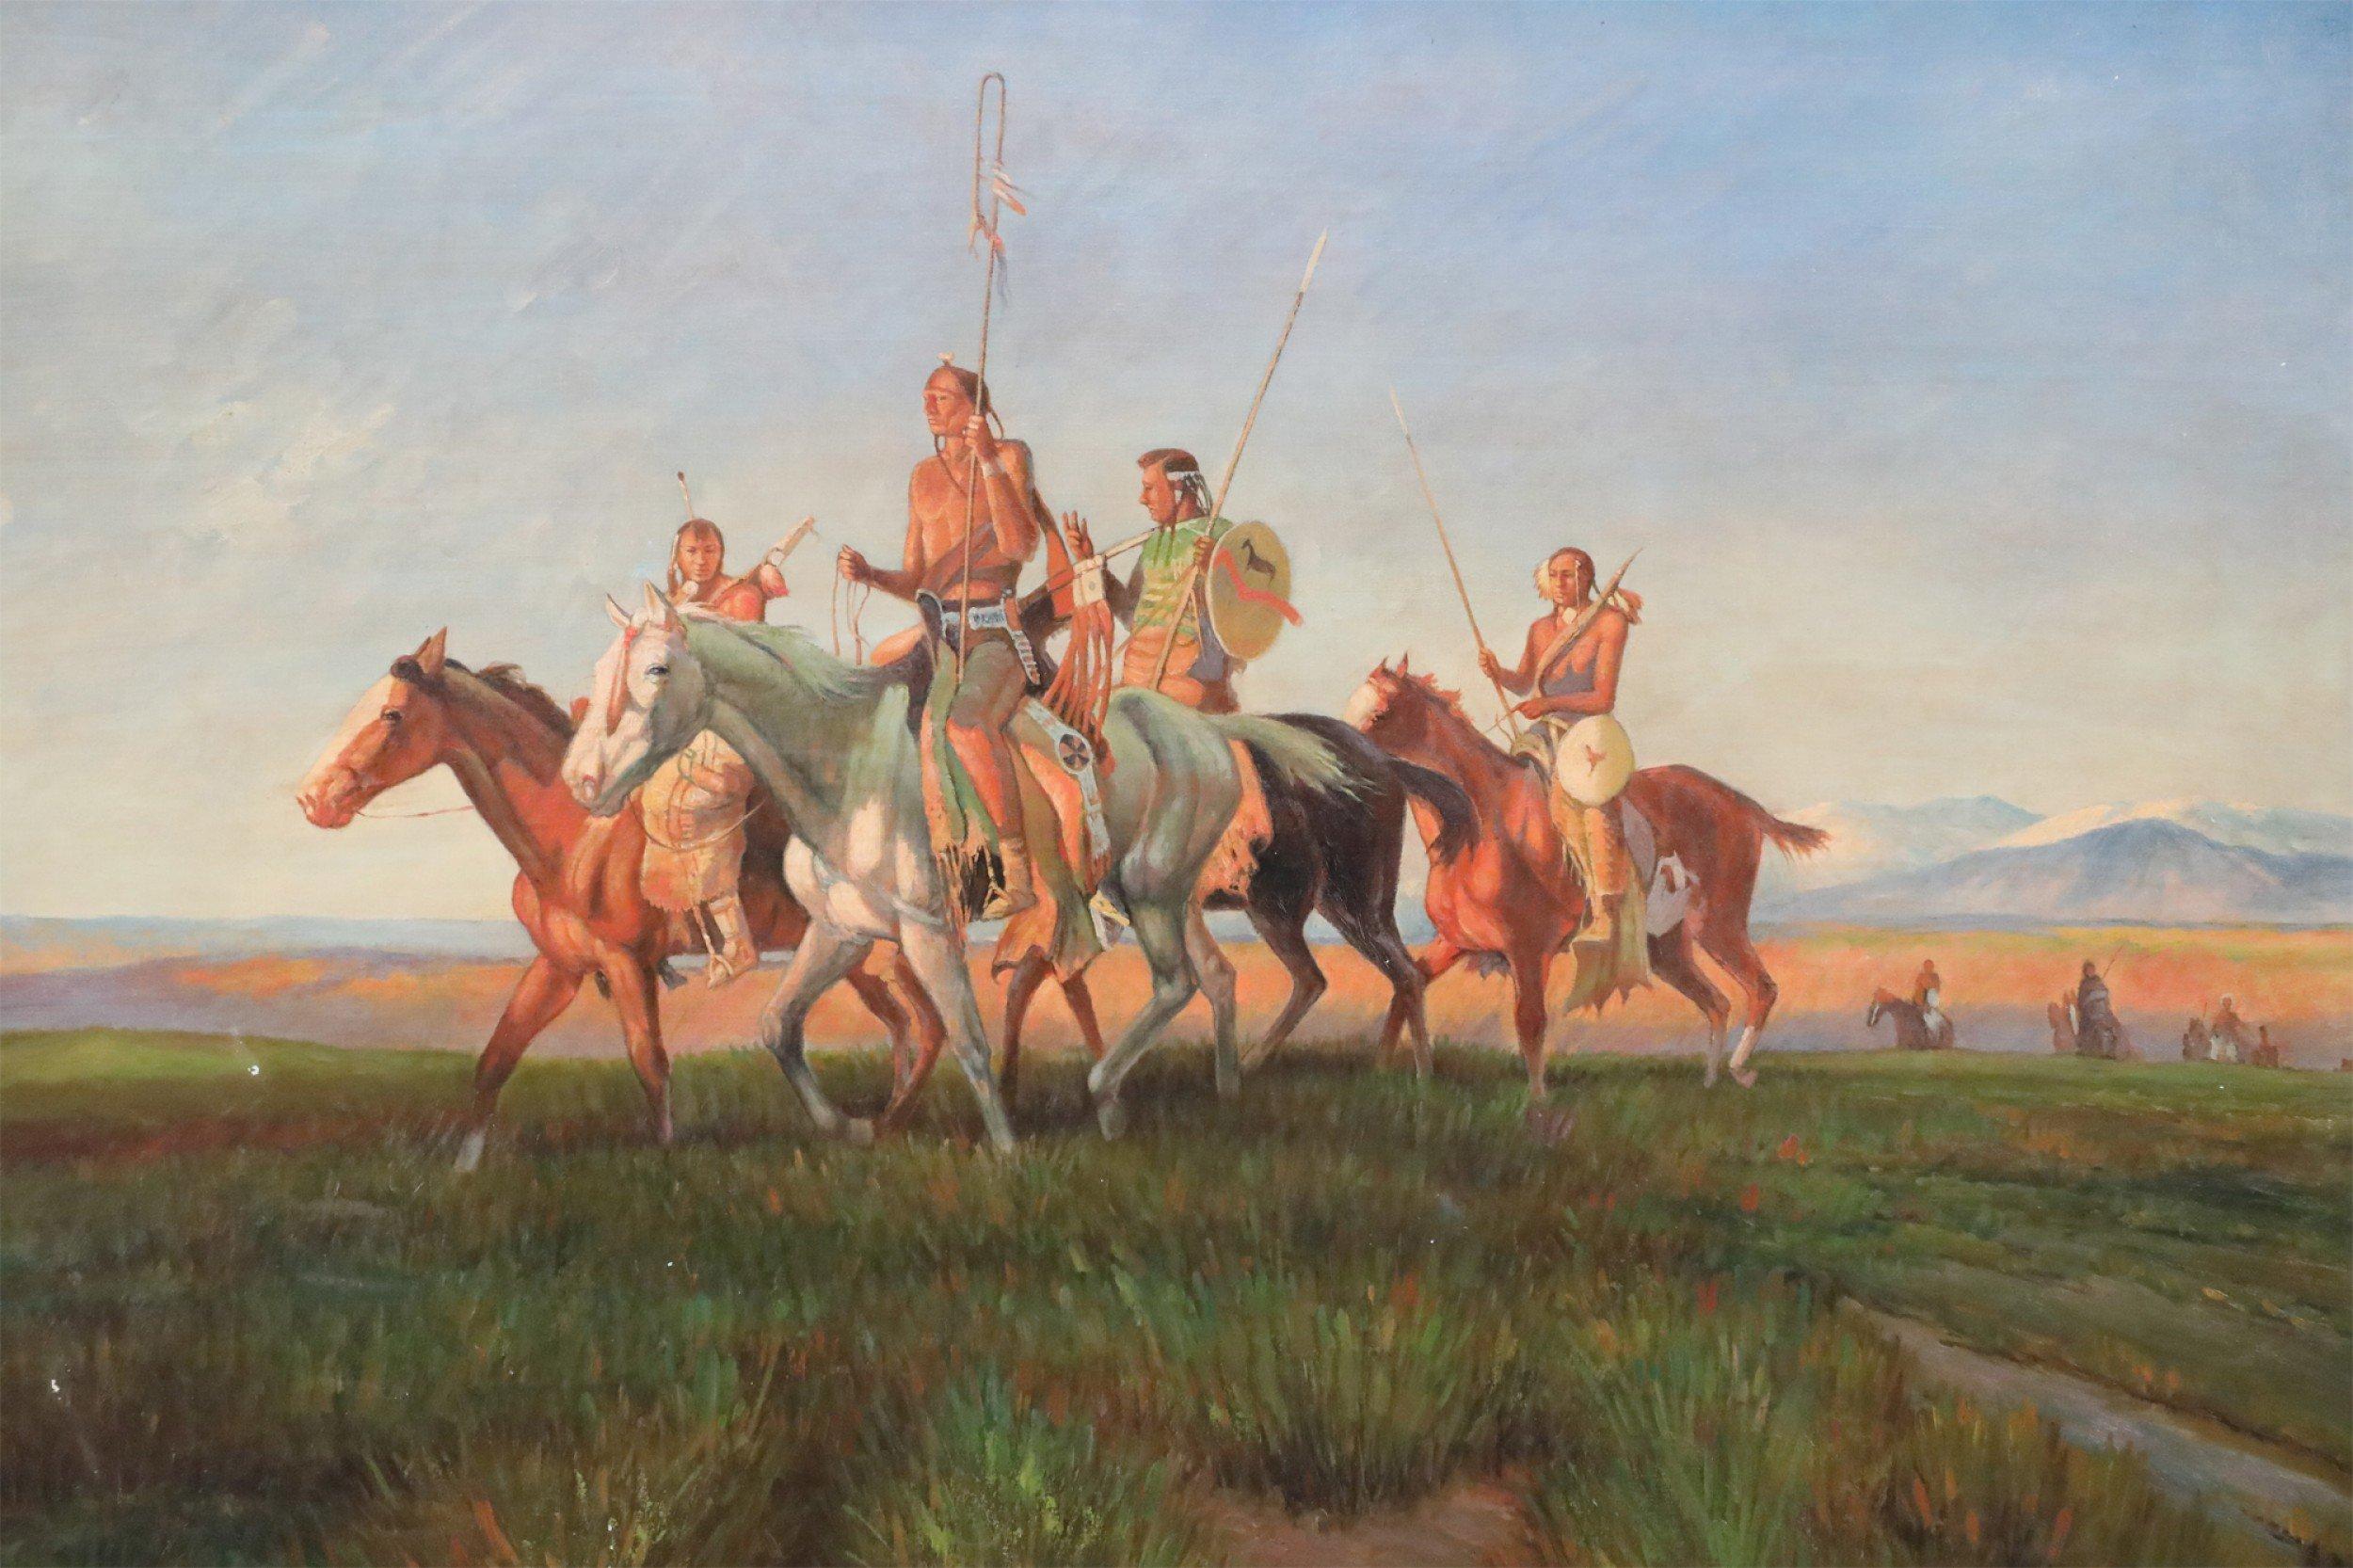 Vintage (20th Century) painting of four Indigenous Americans on horseback leading a line of additional riders behind them through a field of short, brown and green grasses. Painted on canvas in a wood and gold frame, with a linen liner.